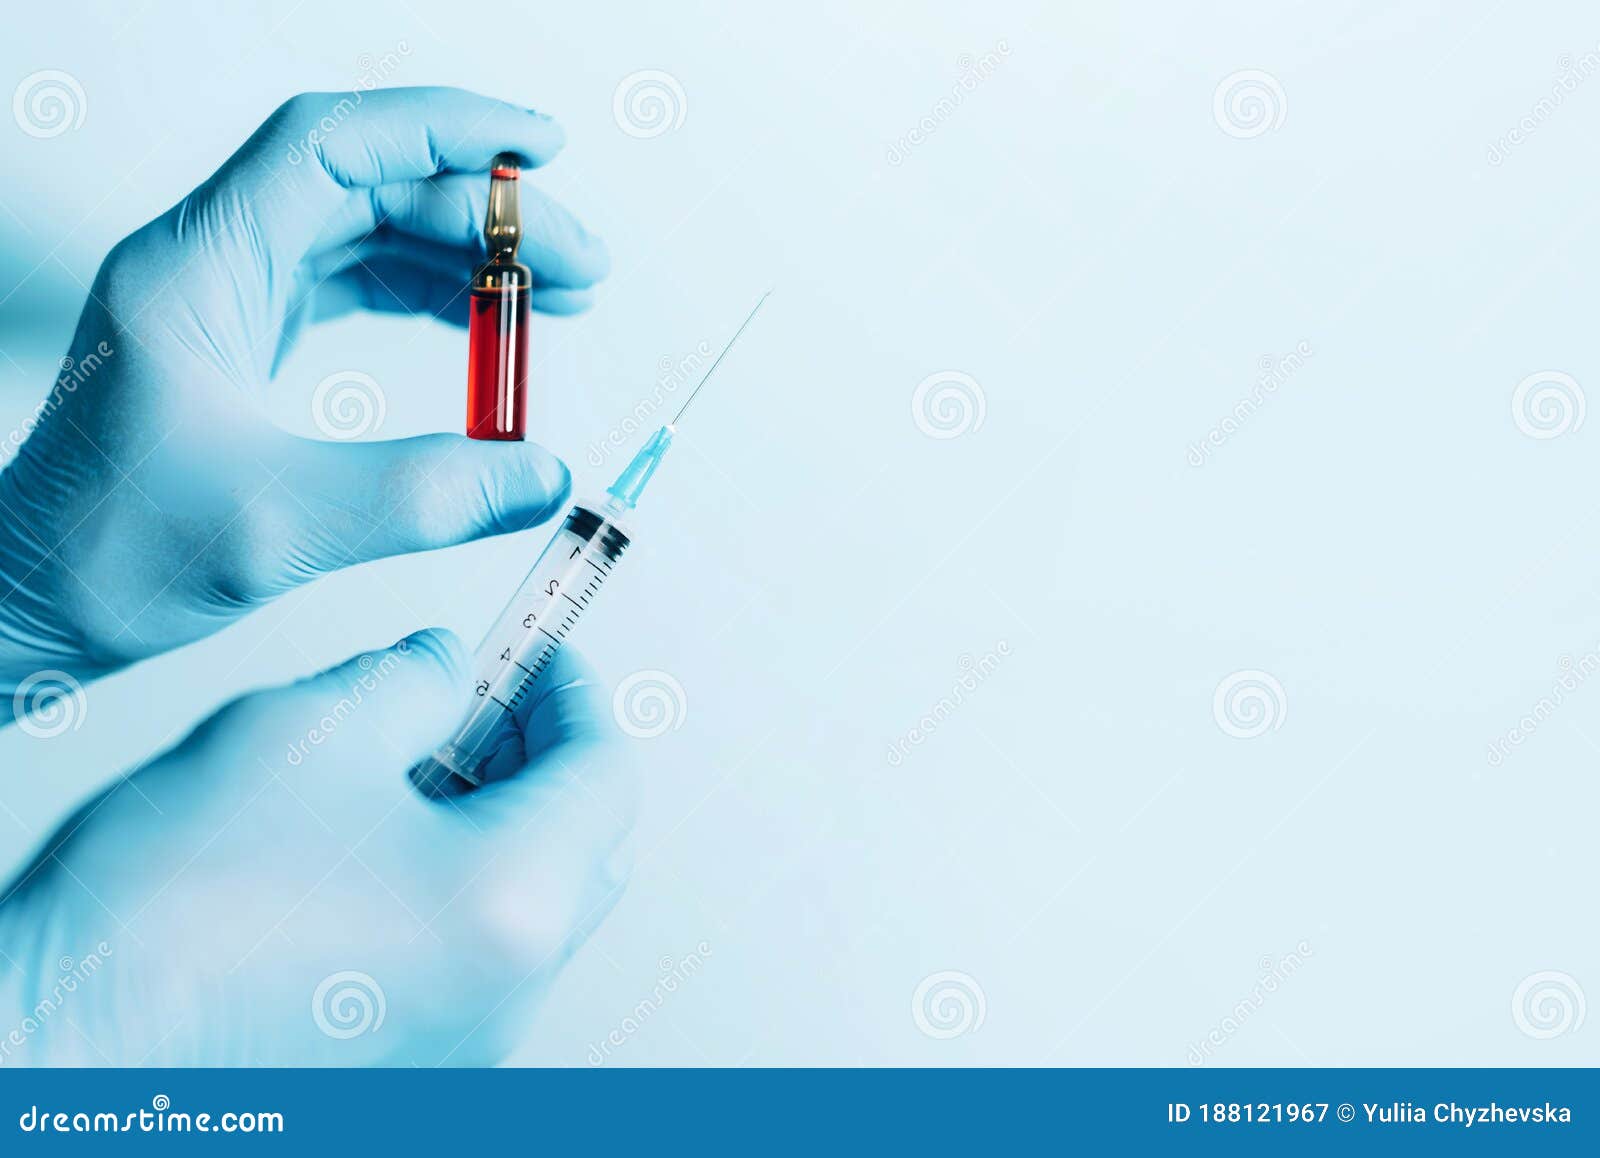 medicine, injections and vaccination concept. hands in medical gloves holding syringe and ampoule on blue background. copy space.